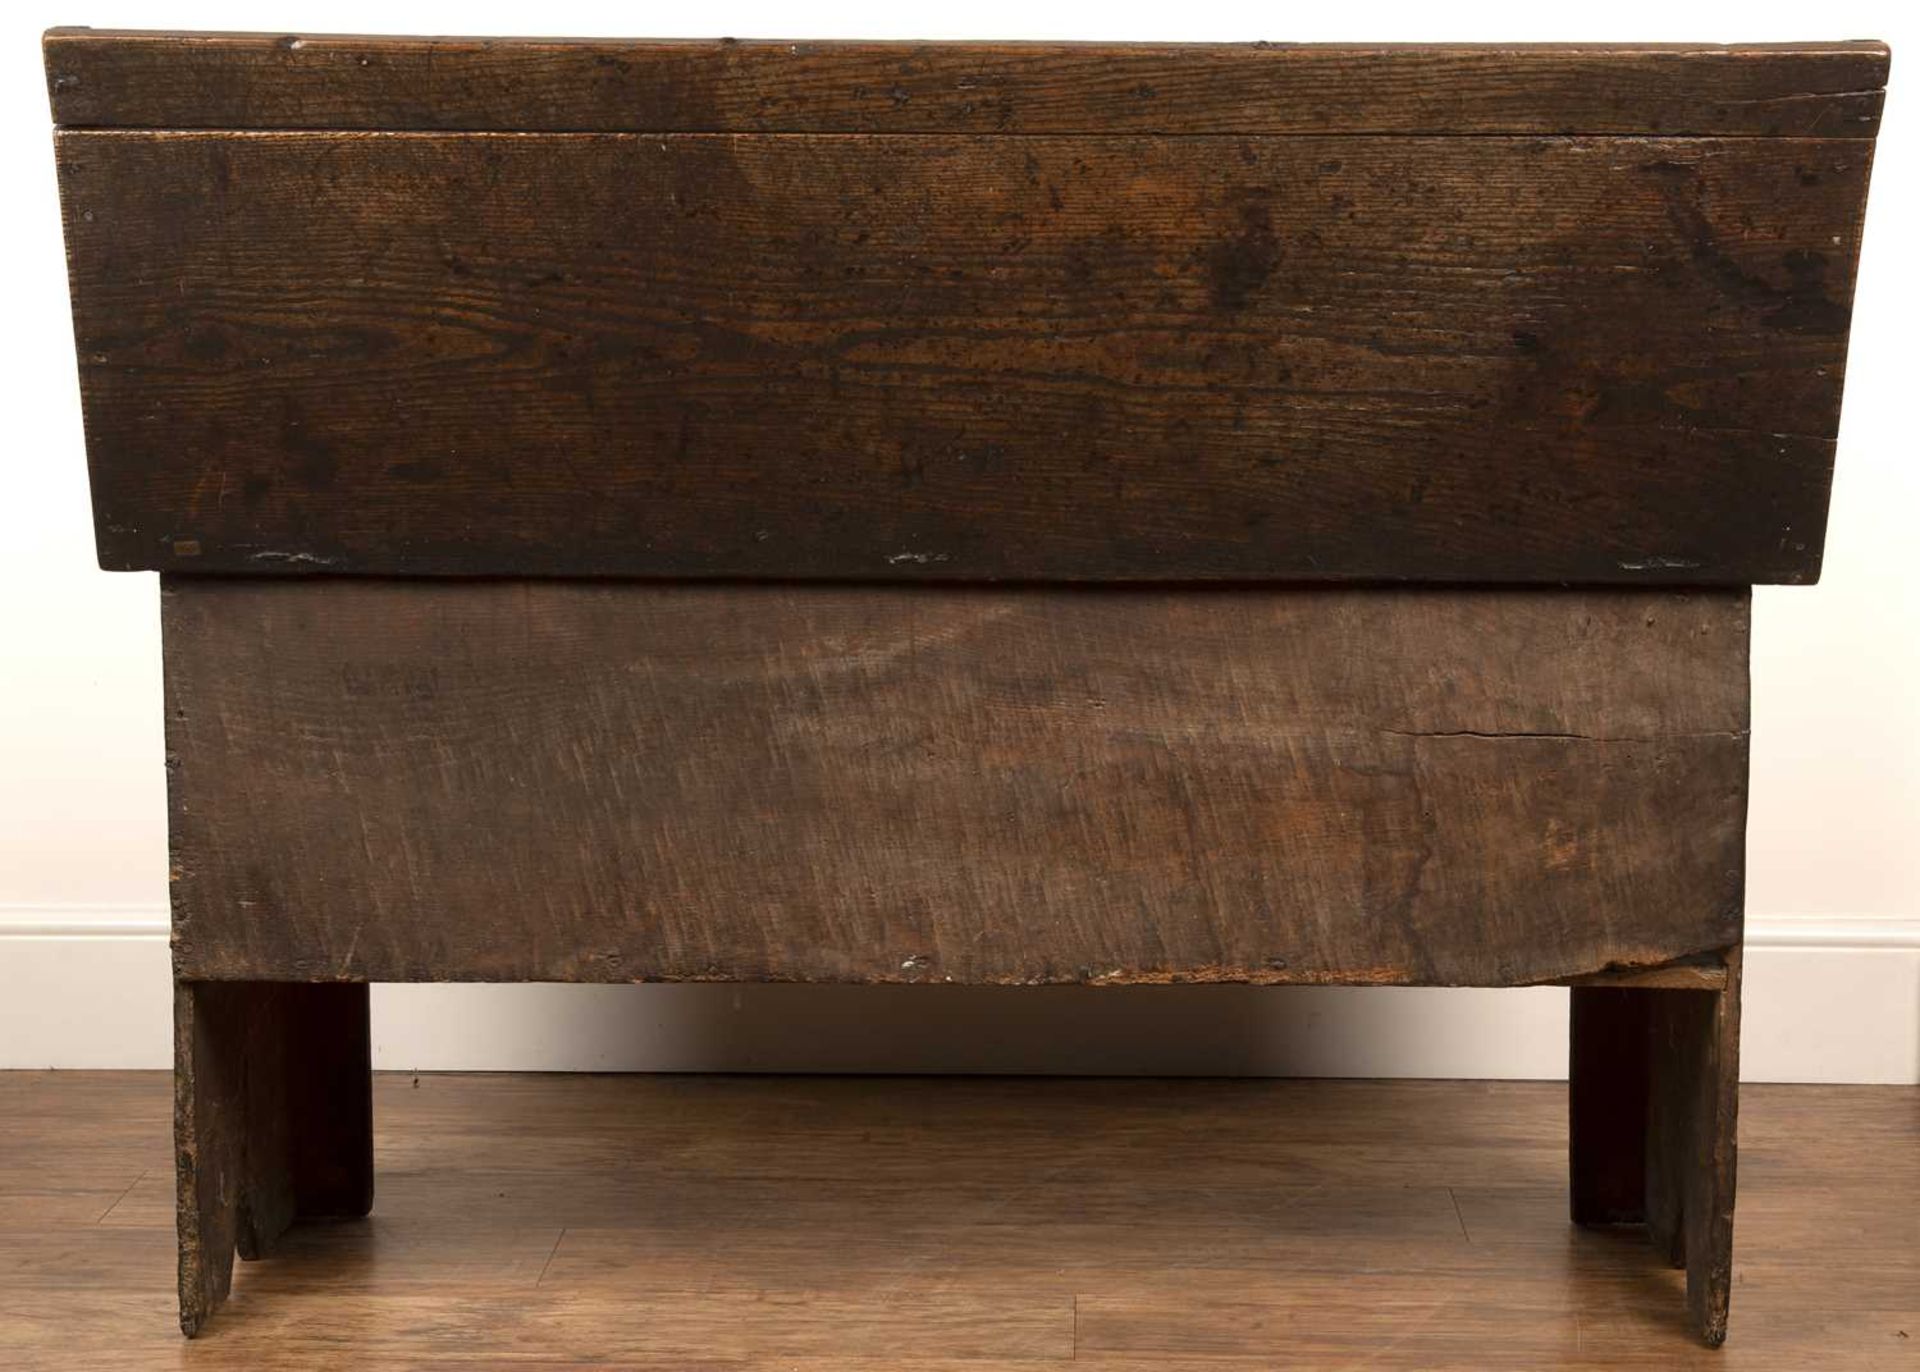 Oak coffer late 17th Century, with a plain double panel front and with iron hinges, 132.5cm wide x - Bild 5 aus 5